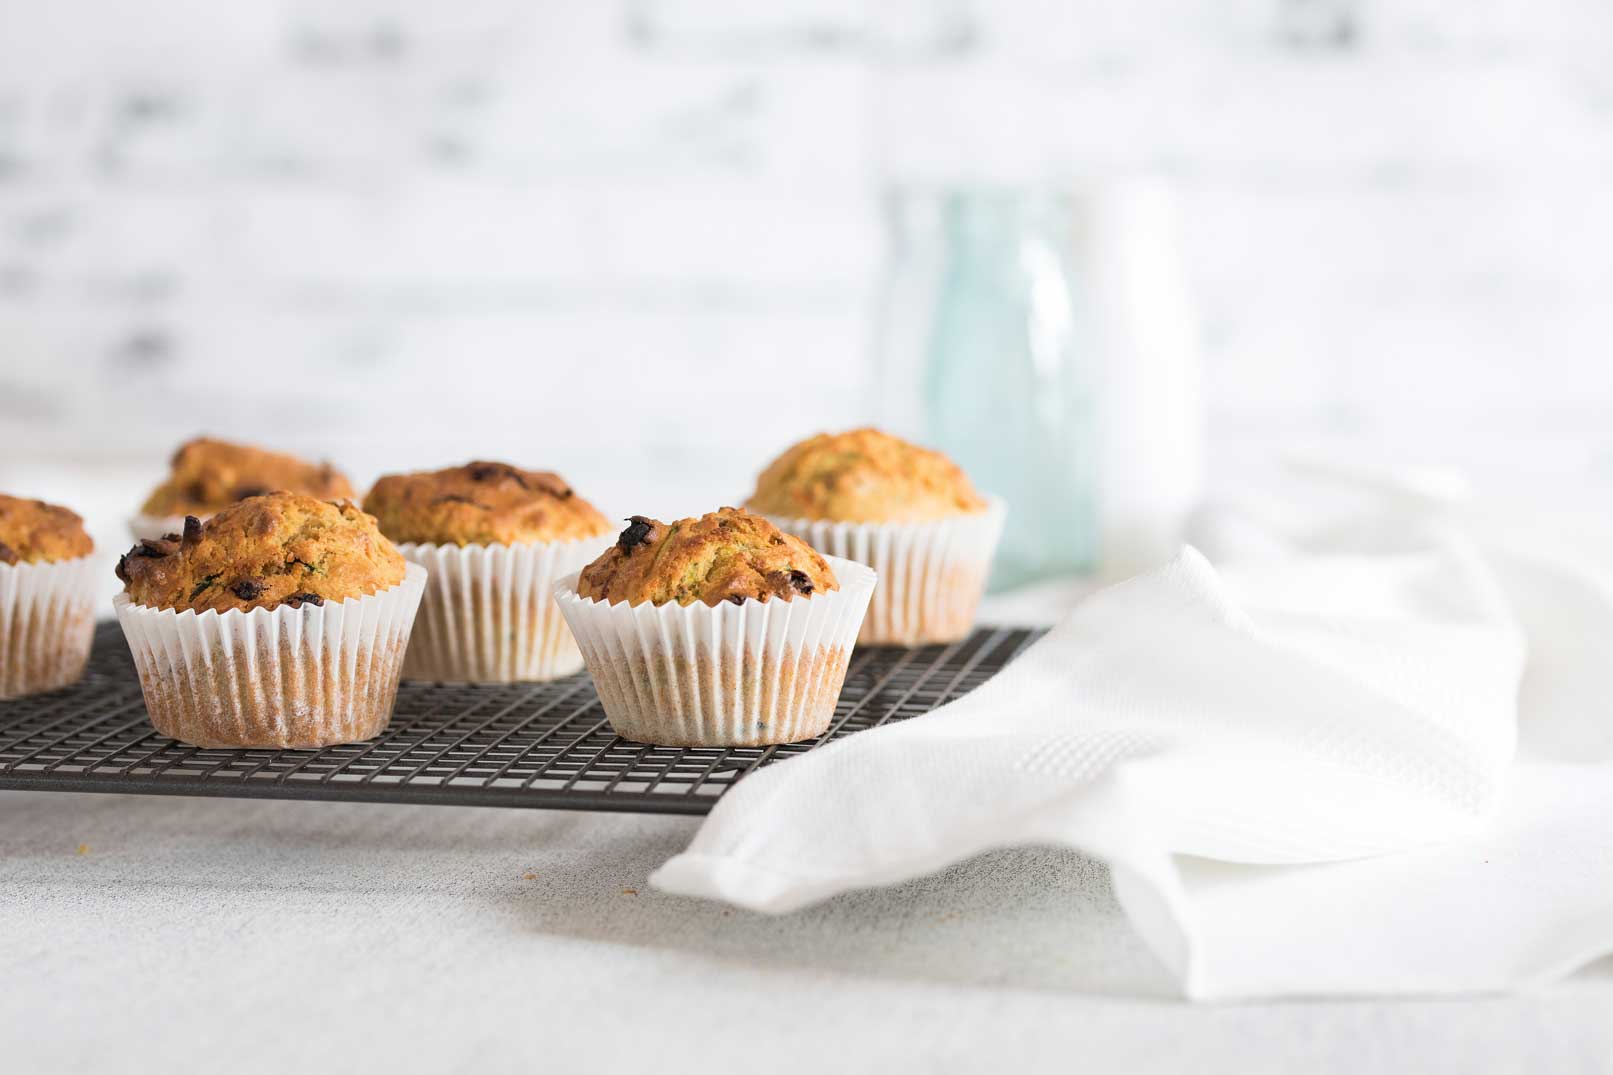 Baked carrot and zucchini muffins on a wire cooling rack with a white cloth napkin on and jug of water in the background.